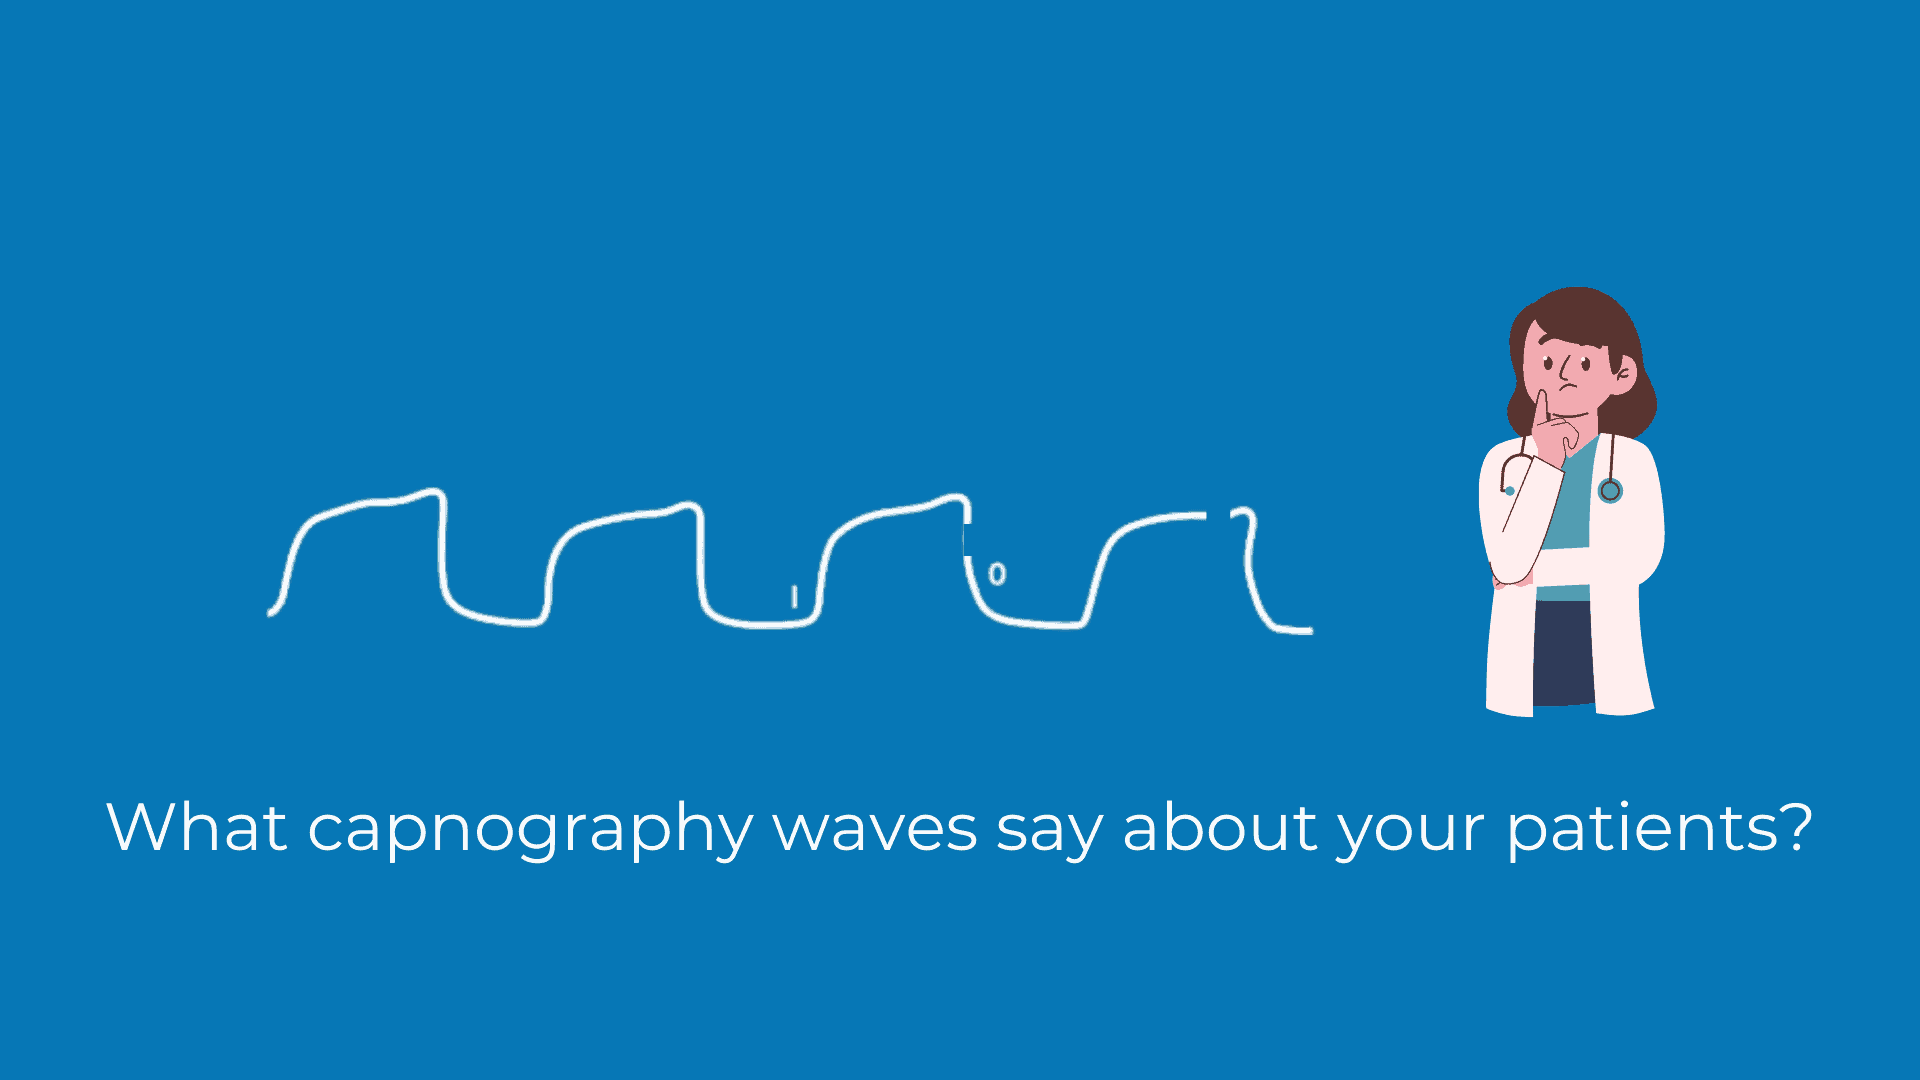 What capnography waves say about your patients?